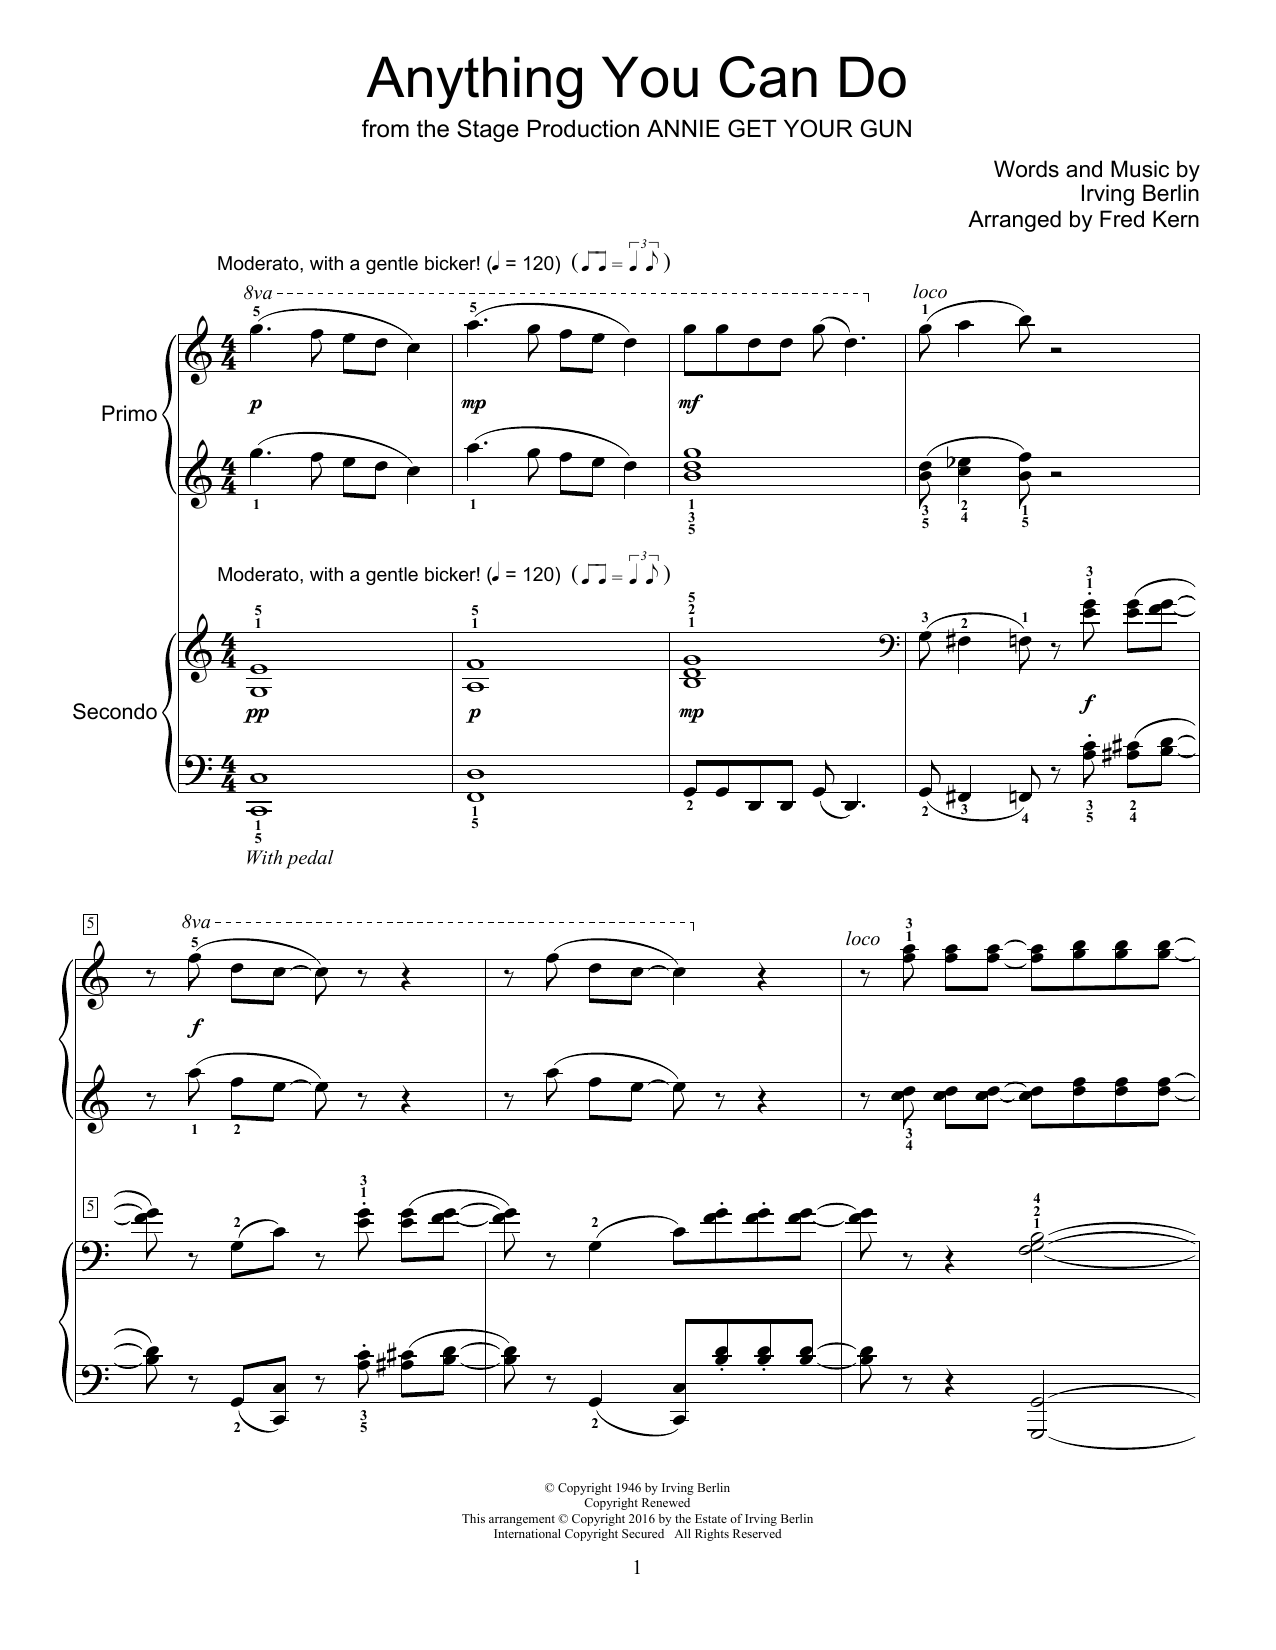 Download Fred Kern Anything You Can Do Sheet Music